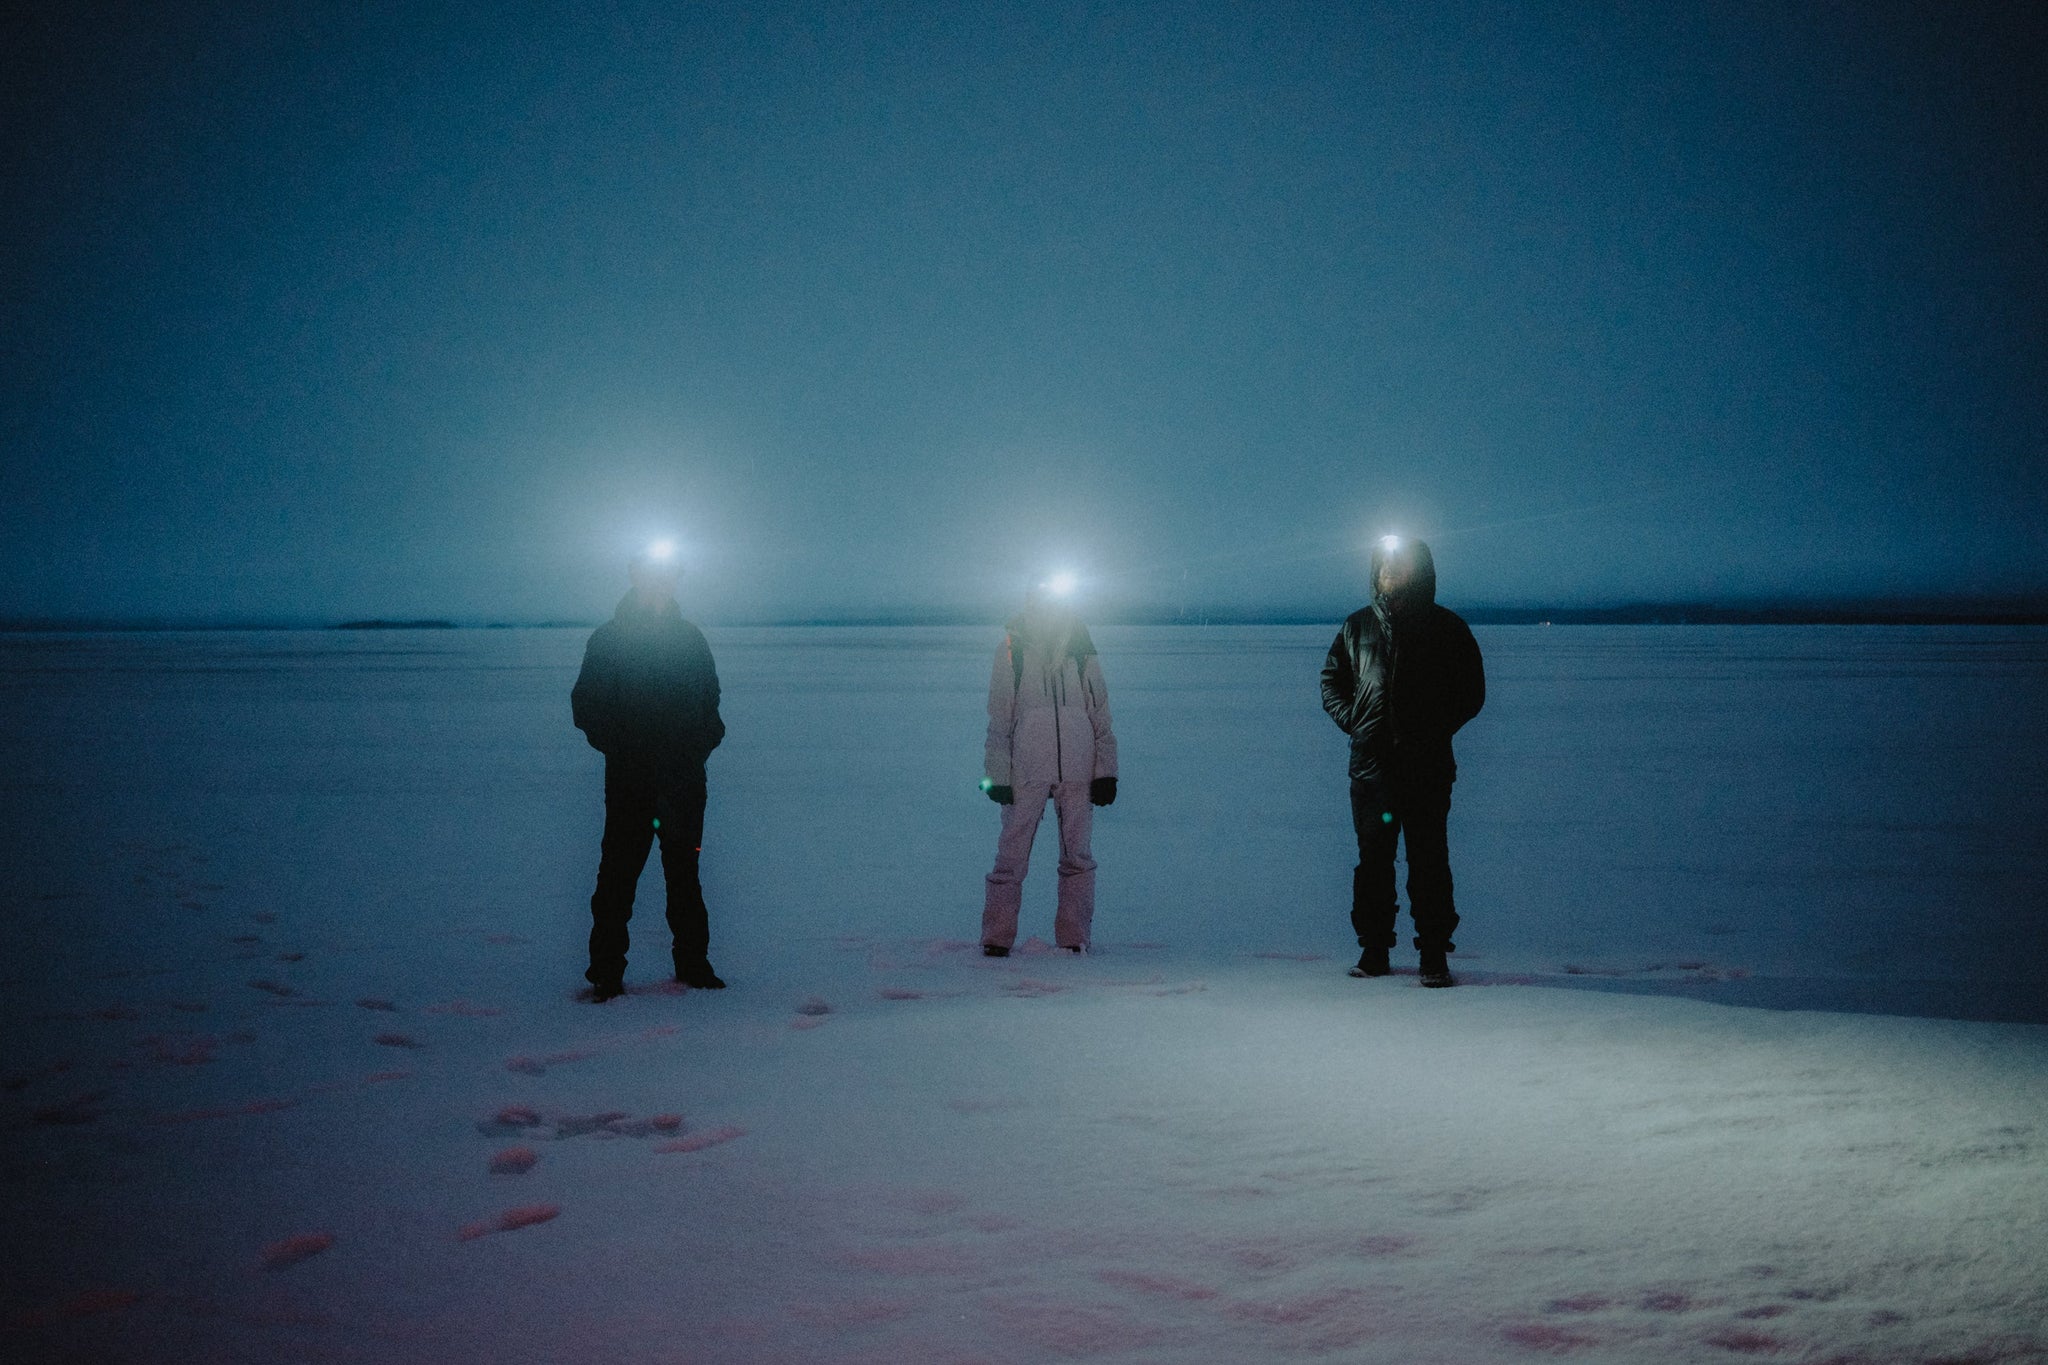 Three people standing at night in the snow with head torches